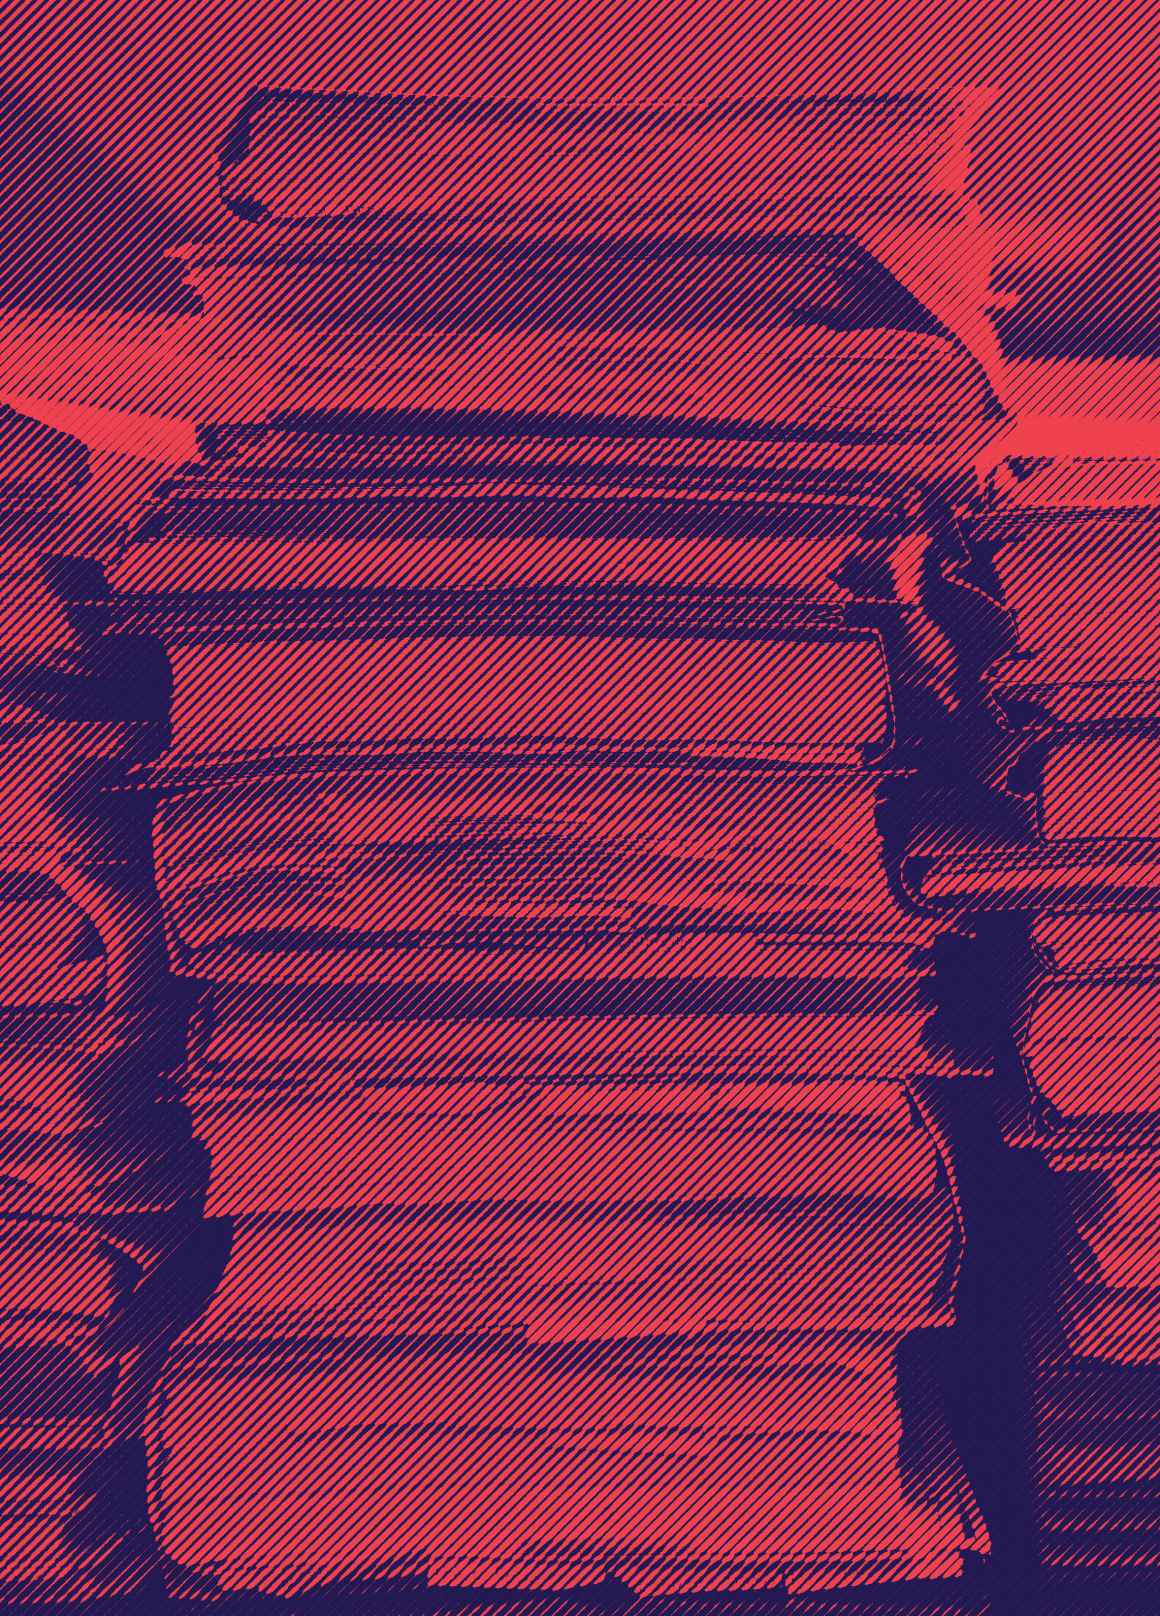 Stack of documents and folders.